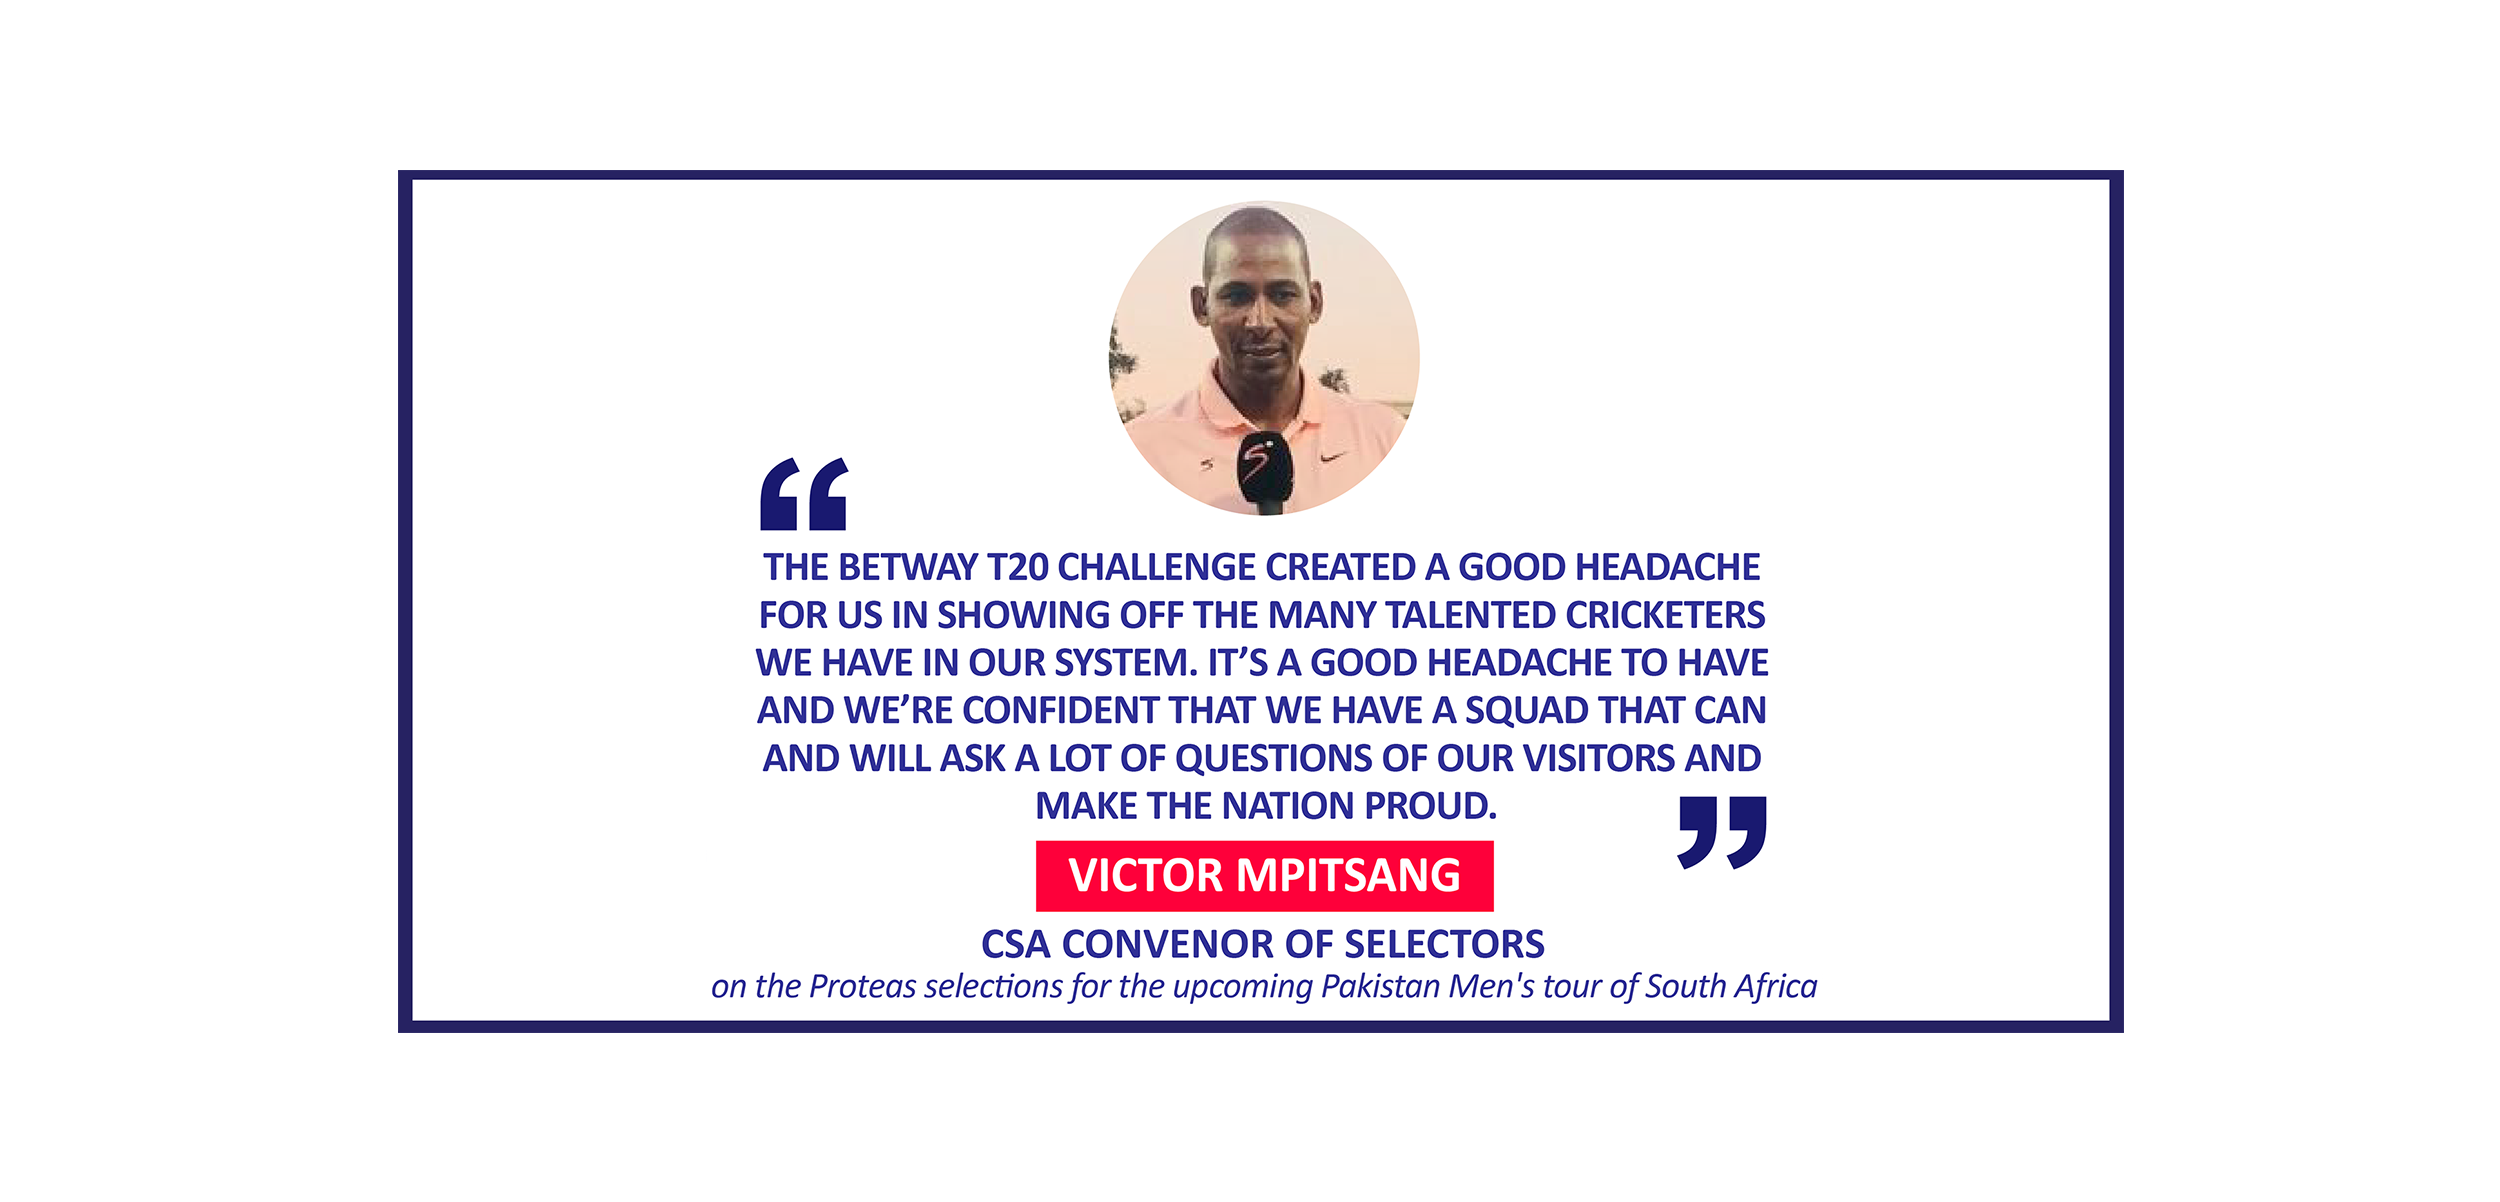 Victor Mpitsang, CSA Convenor of Selectors on the Proteas selections for the upcoming Pakistan Men's tour of South Africa